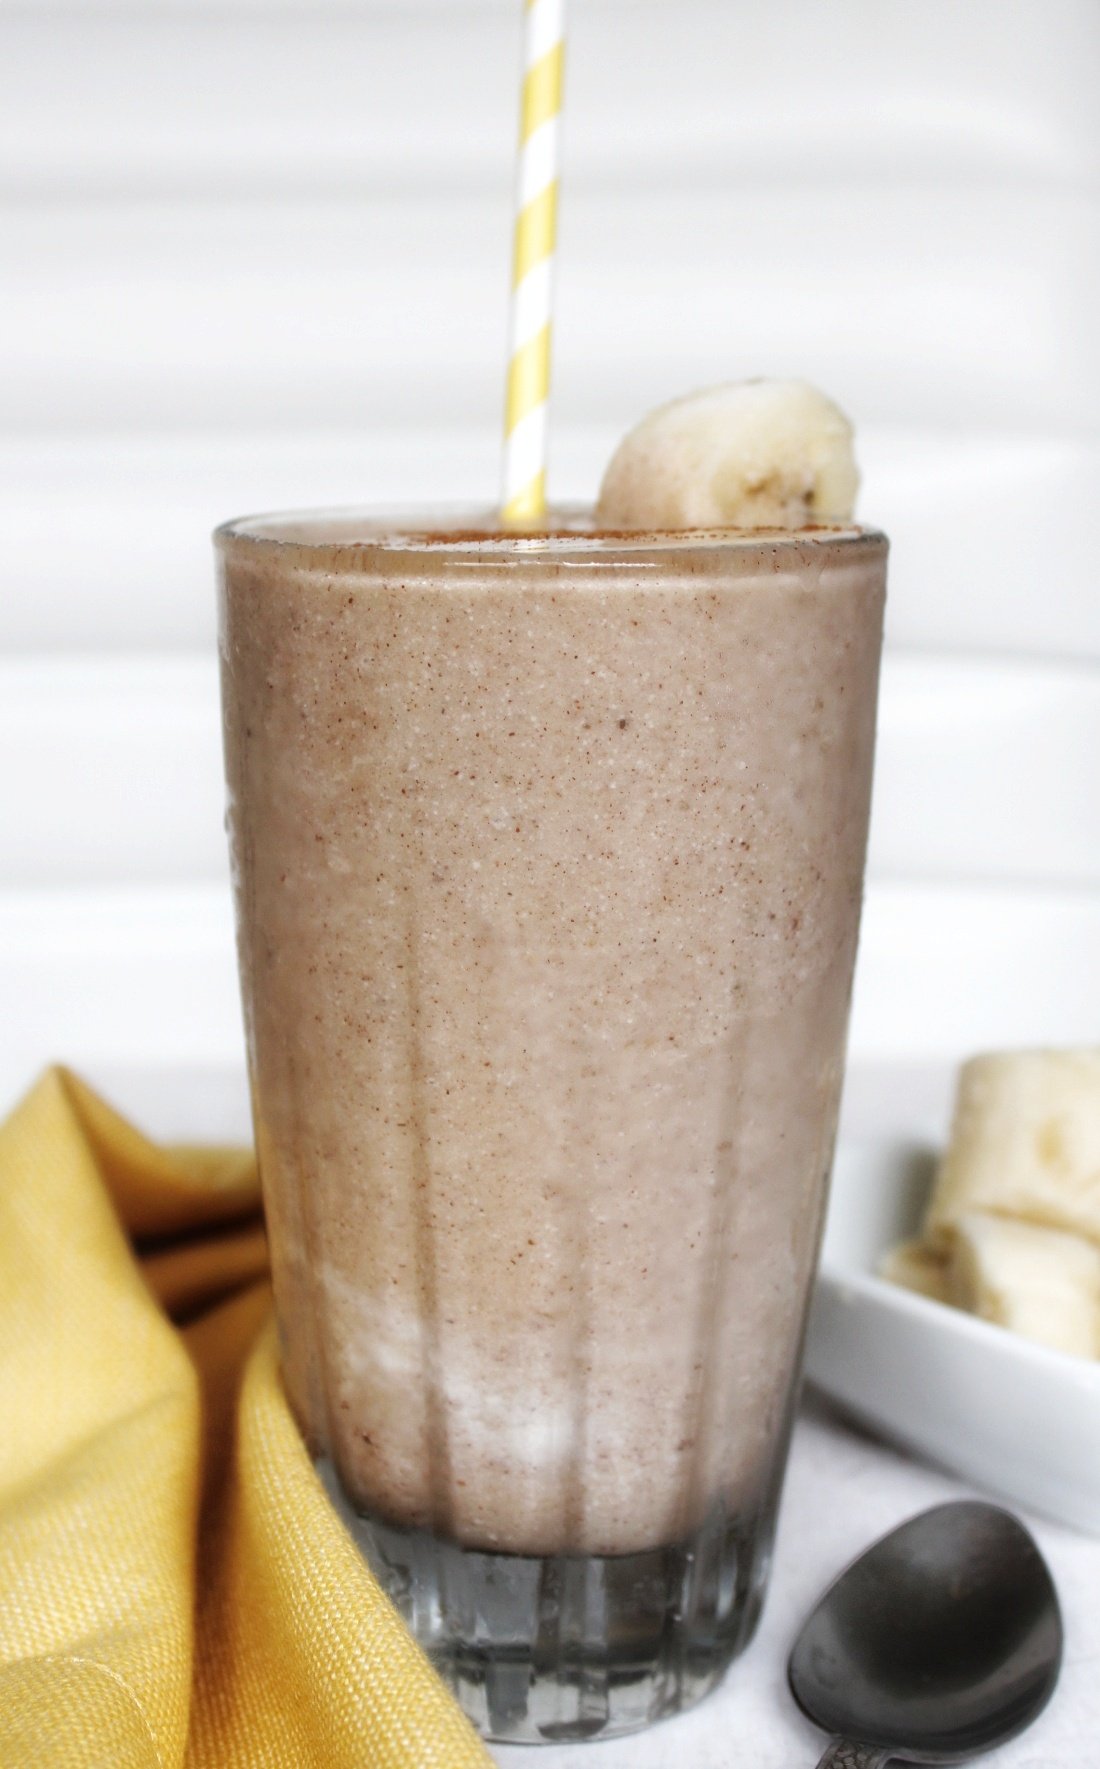 Milkshake in a glass cup with sliced banana and a yellow white stripped straw